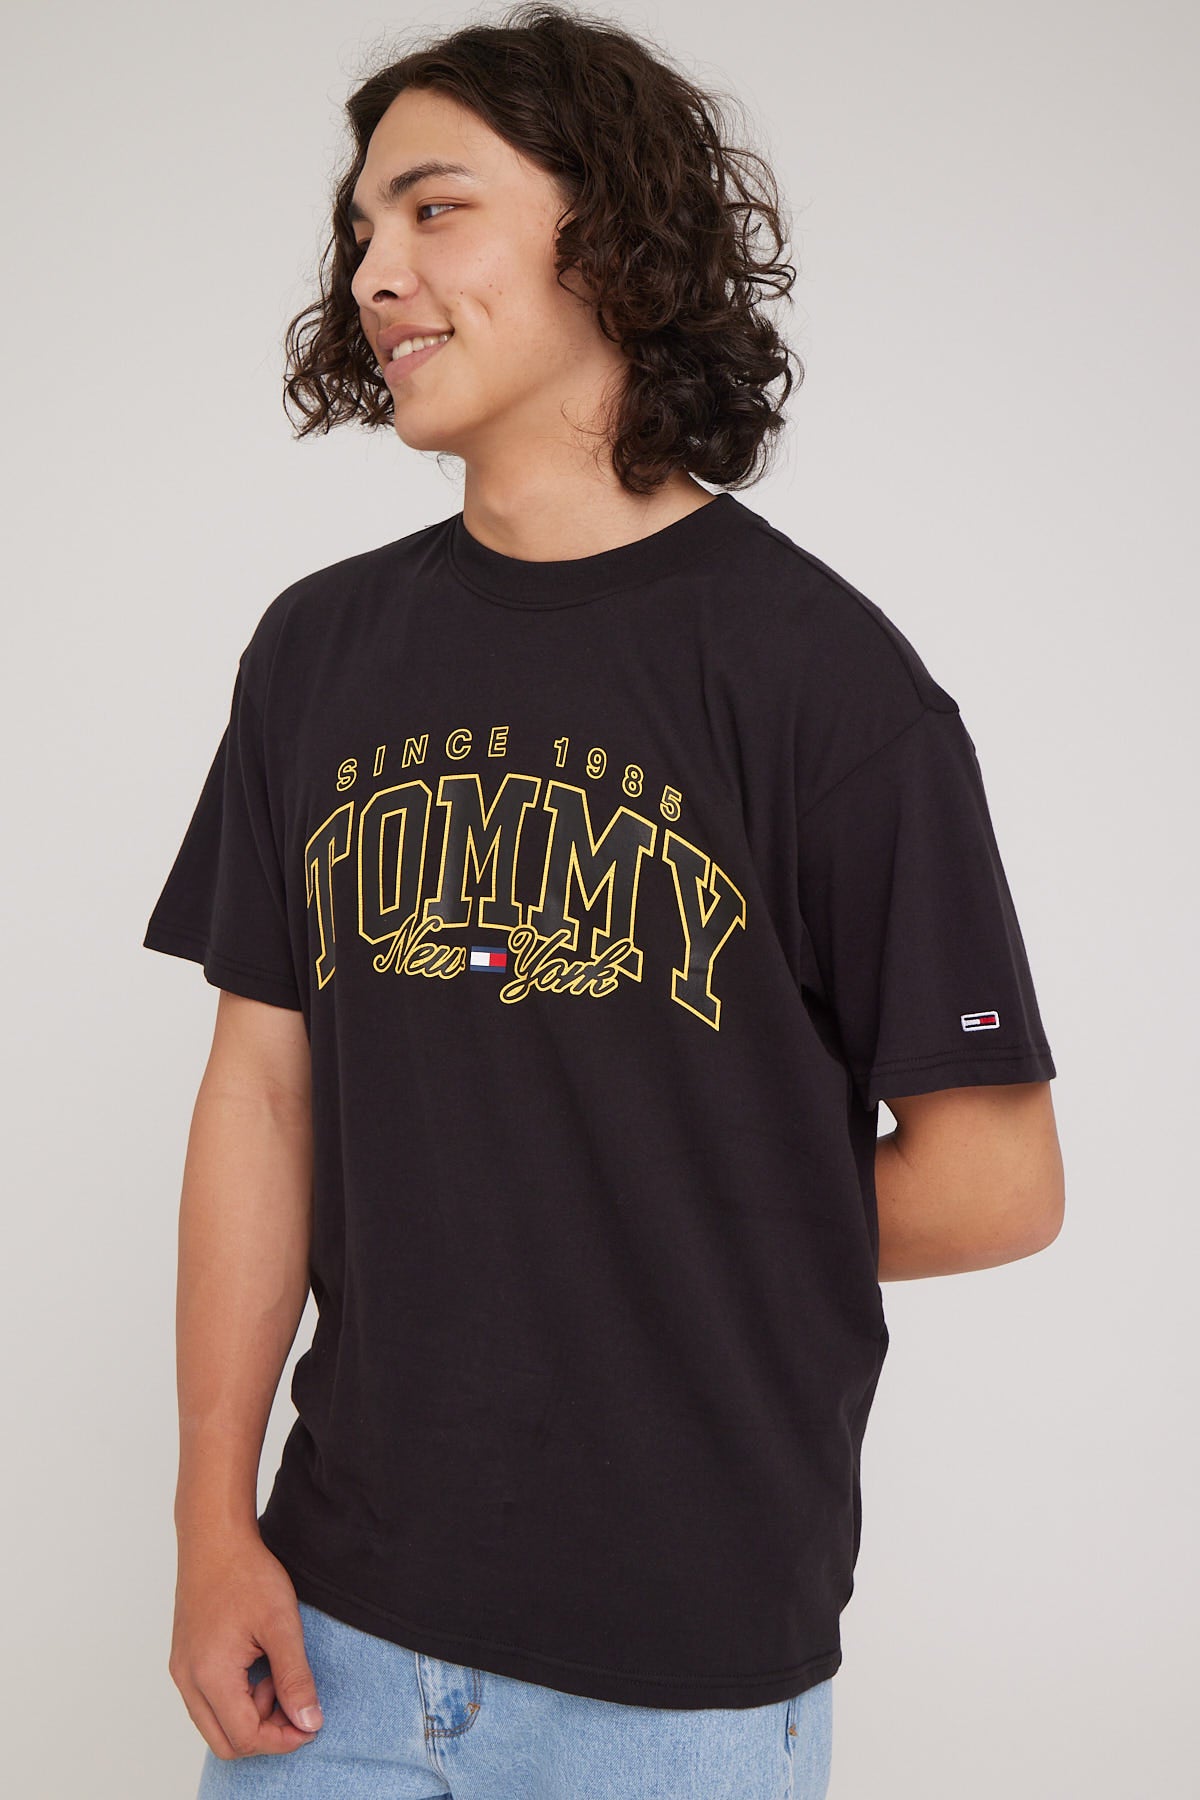 Tommy Jeans | Men's Clothing & Accessories – Universal Store